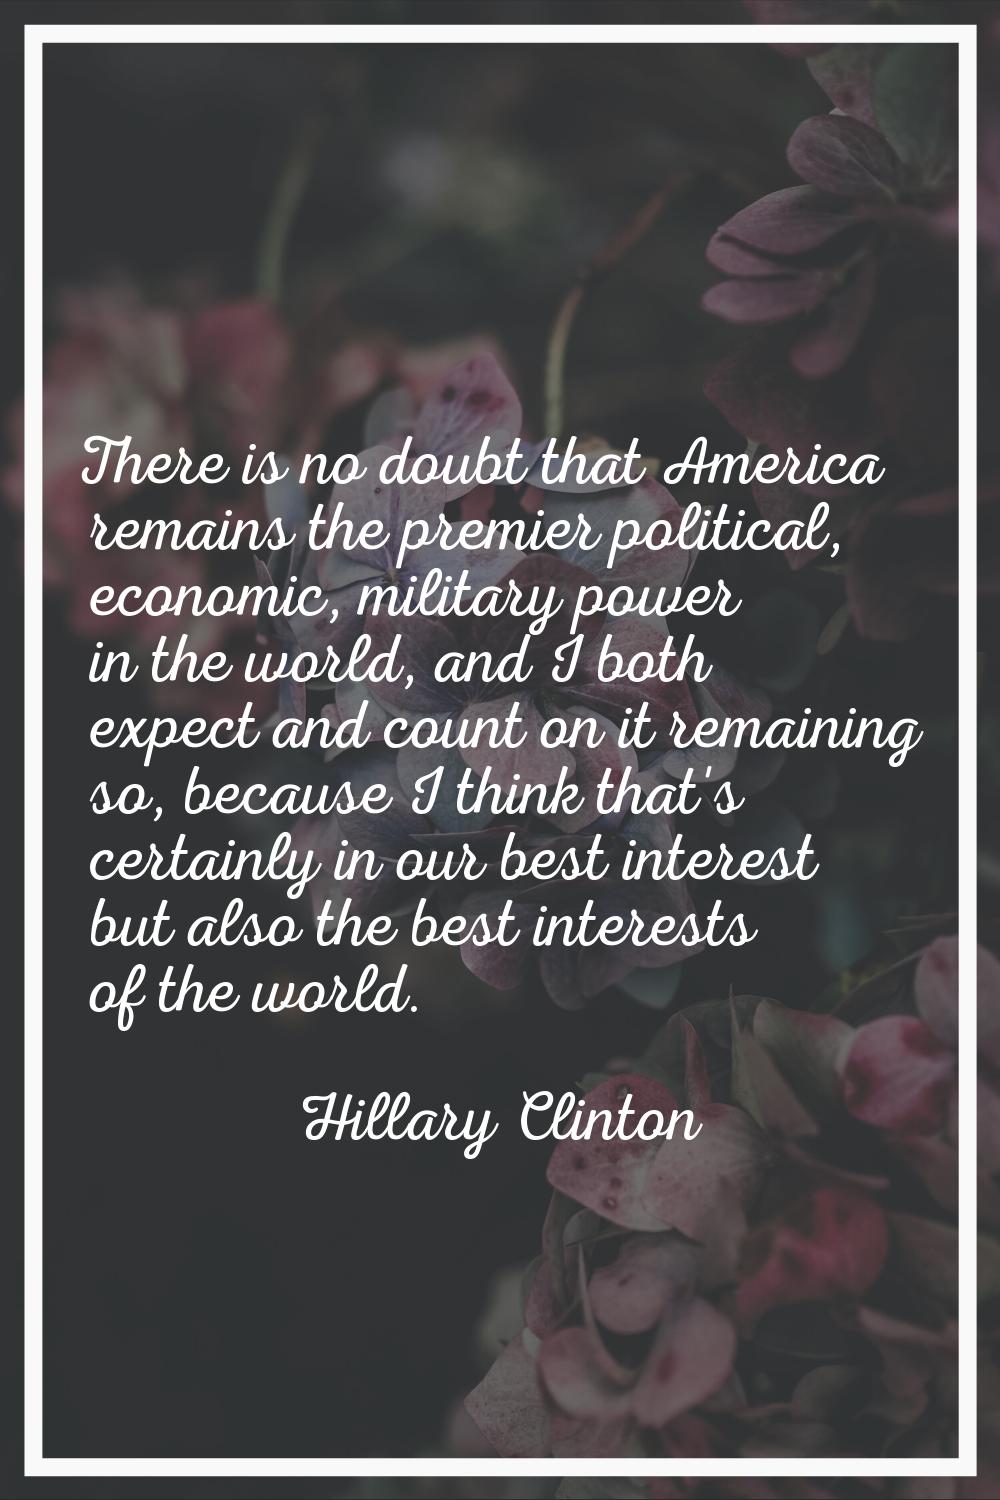 There is no doubt that America remains the premier political, economic, military power in the world